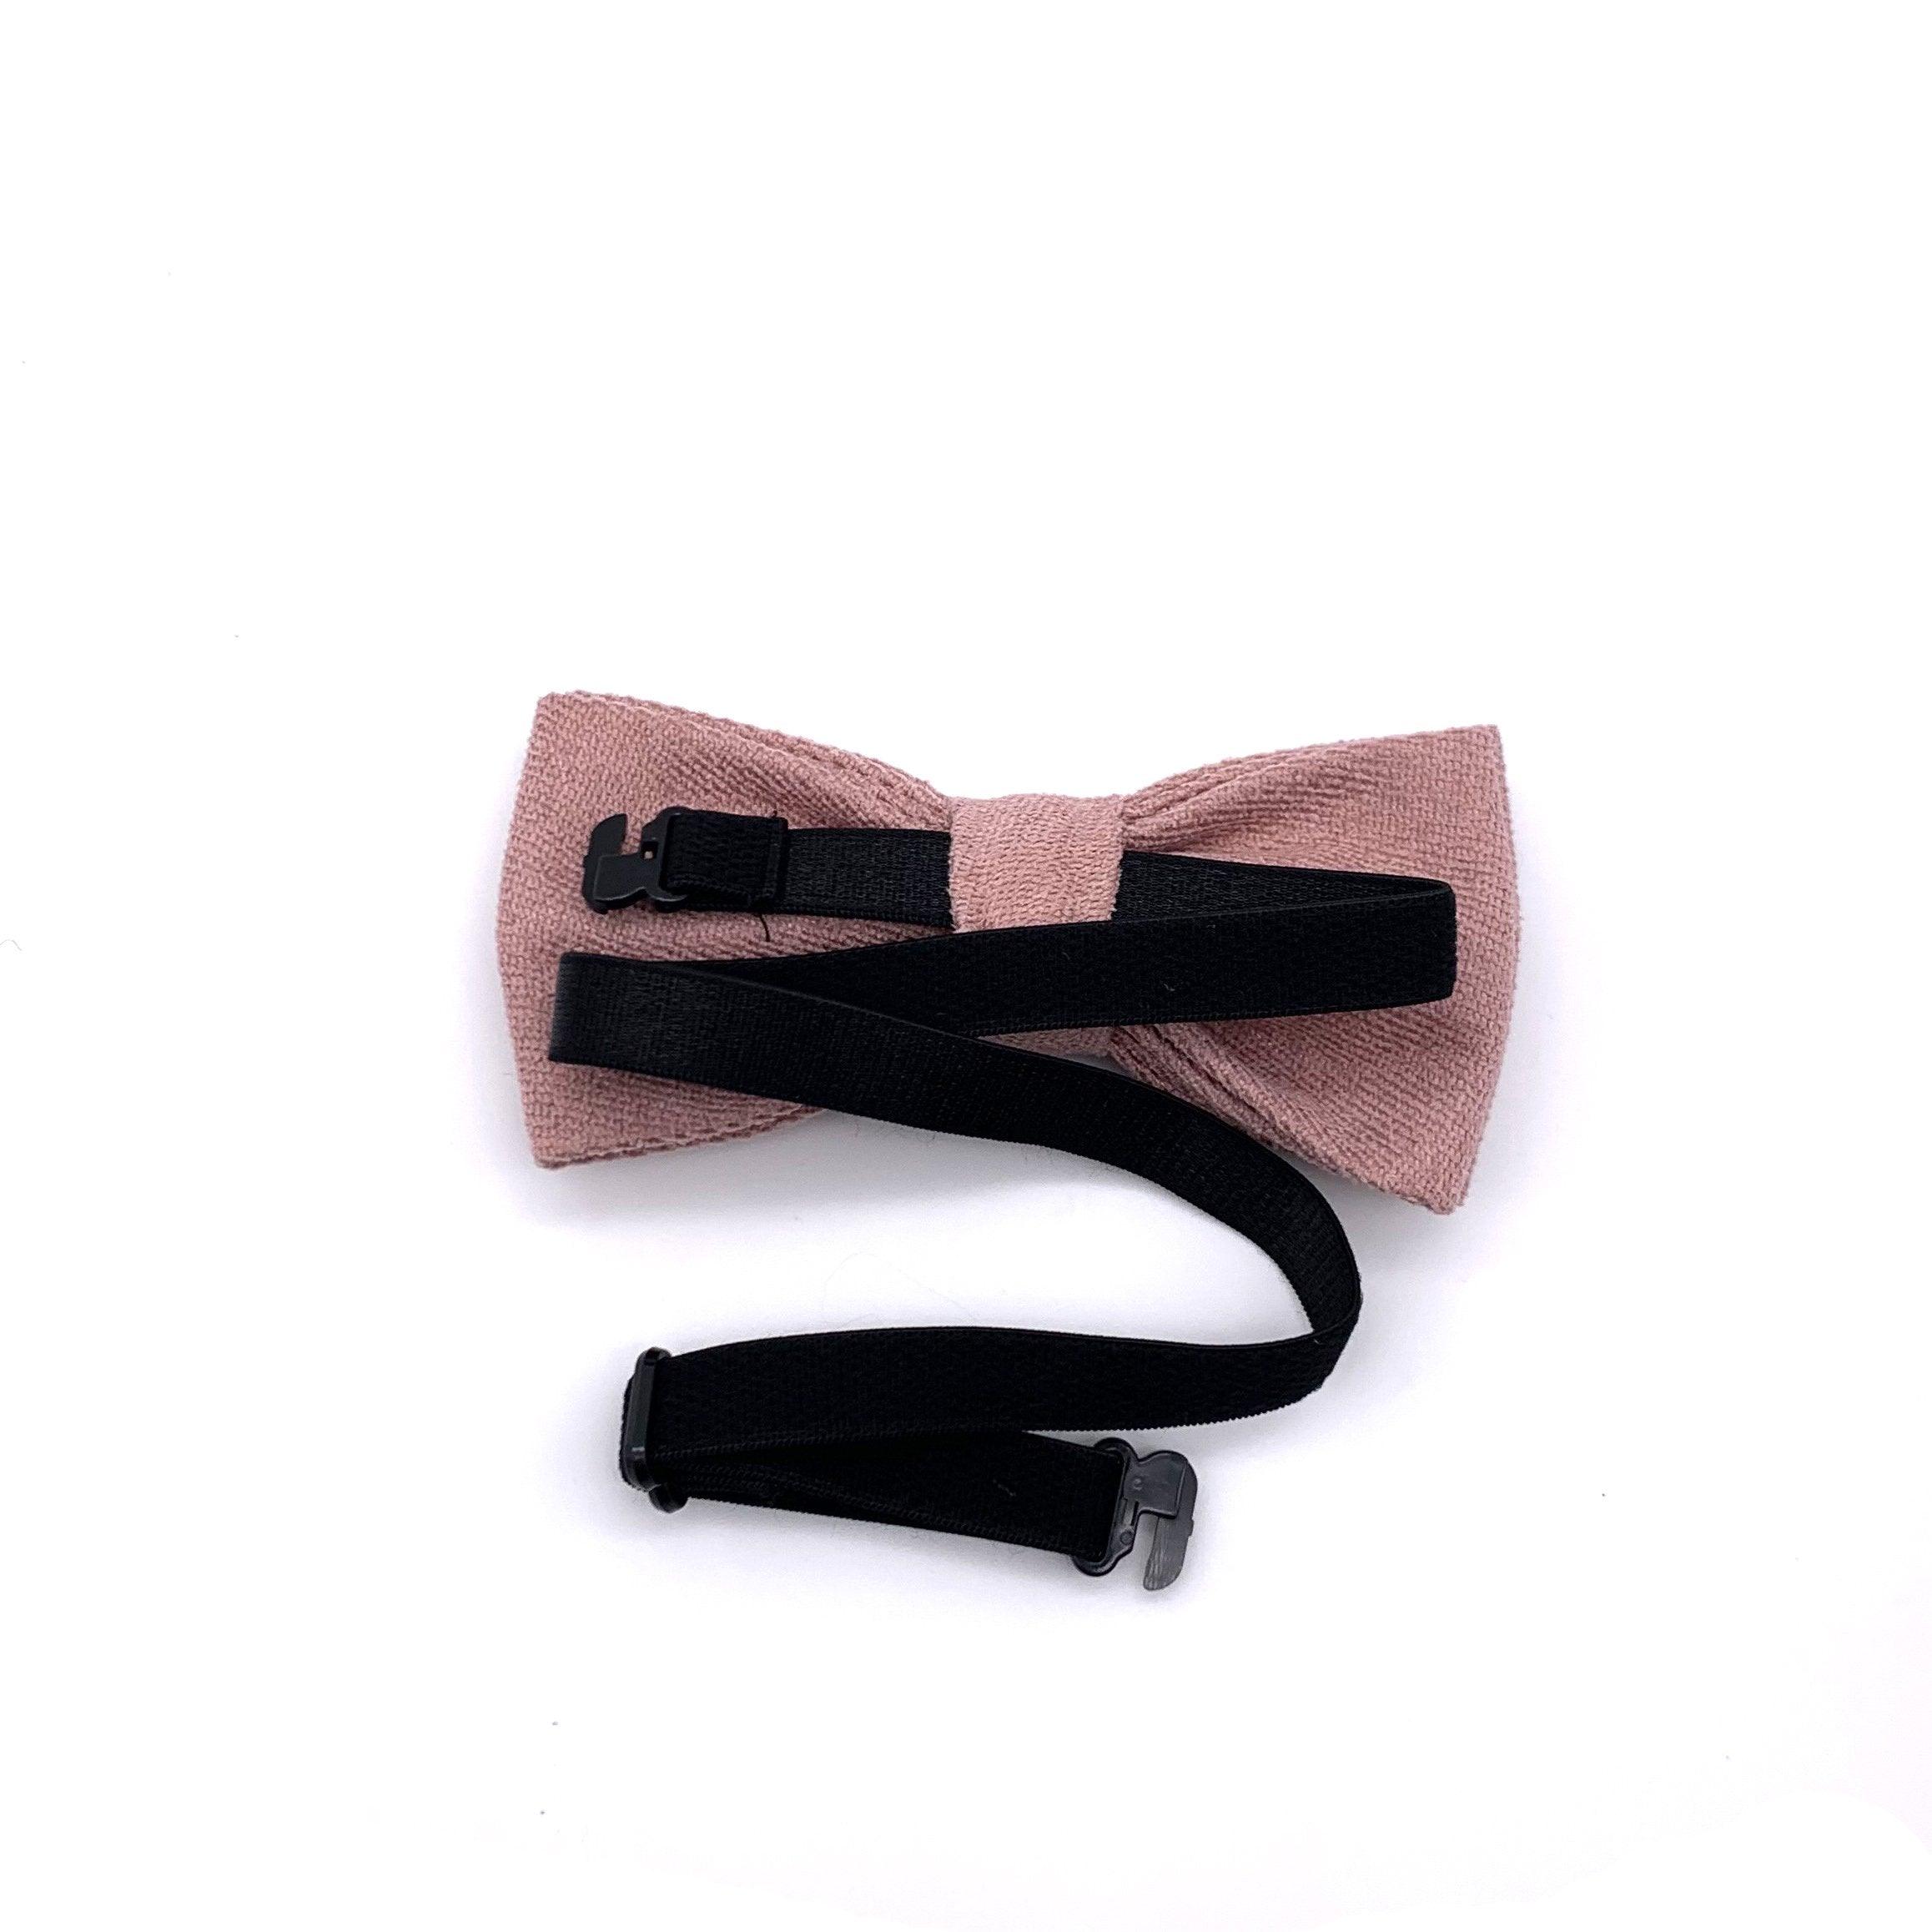 Kids Floral Baby Bow tie Mytieshop - ROSÉ-Kids Floral Baby Bow tie Color: Pink Strap is adjustablePre-Tied bowtieBow Tie 10.5 * 6CM Great for Prom Dinners Interviews Photo shoots Photo sessions Dates Wedding Attendant Ring Bearers Kid&#39;s Pink Bow Tie Fits toddlers and babies. Evabder baby ow tie toddler bow tie floral for wedding and events groom groomsmen flower bow tie mytieshop ring bearer page boy bow tie white bow tie white and blue tie kids bowtie floral Adjustable wedding attire for toddle